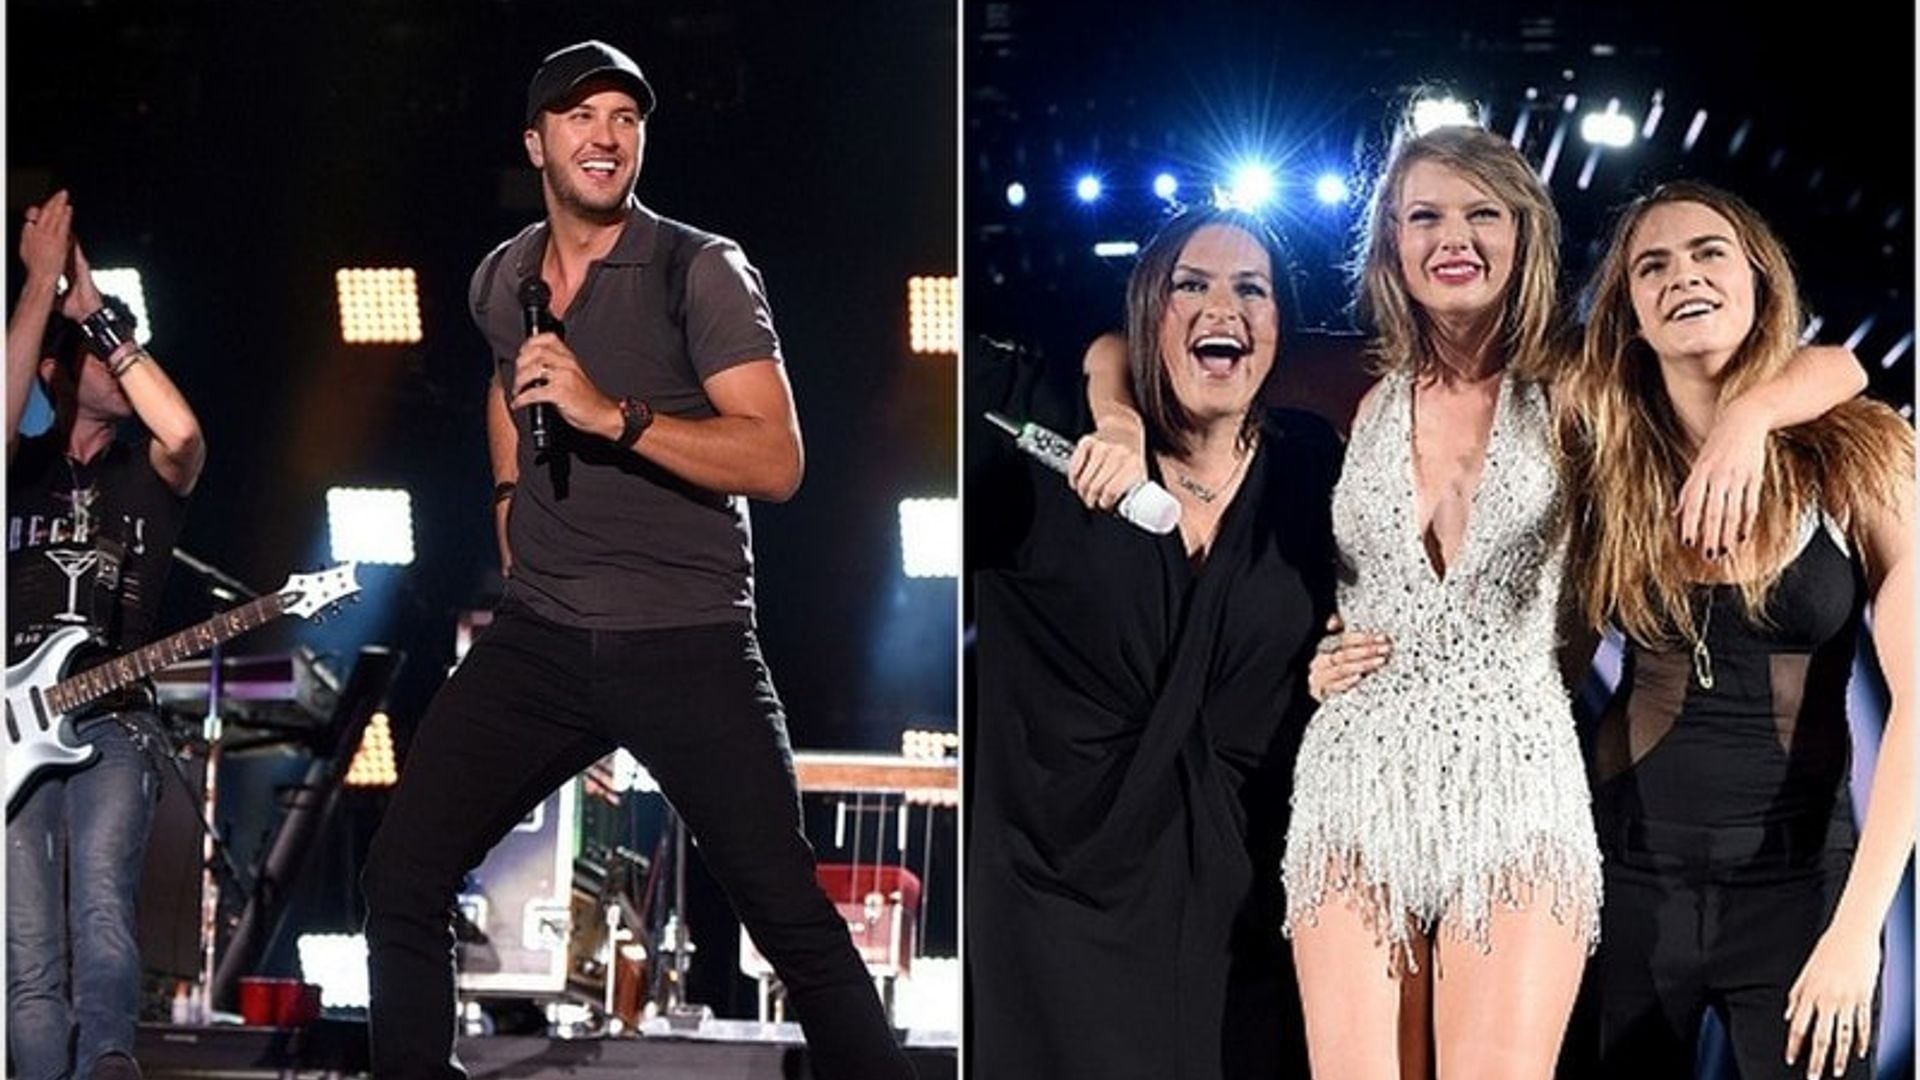 Celebrity week in photos: Carrie Underwood, Taylor Swift and more